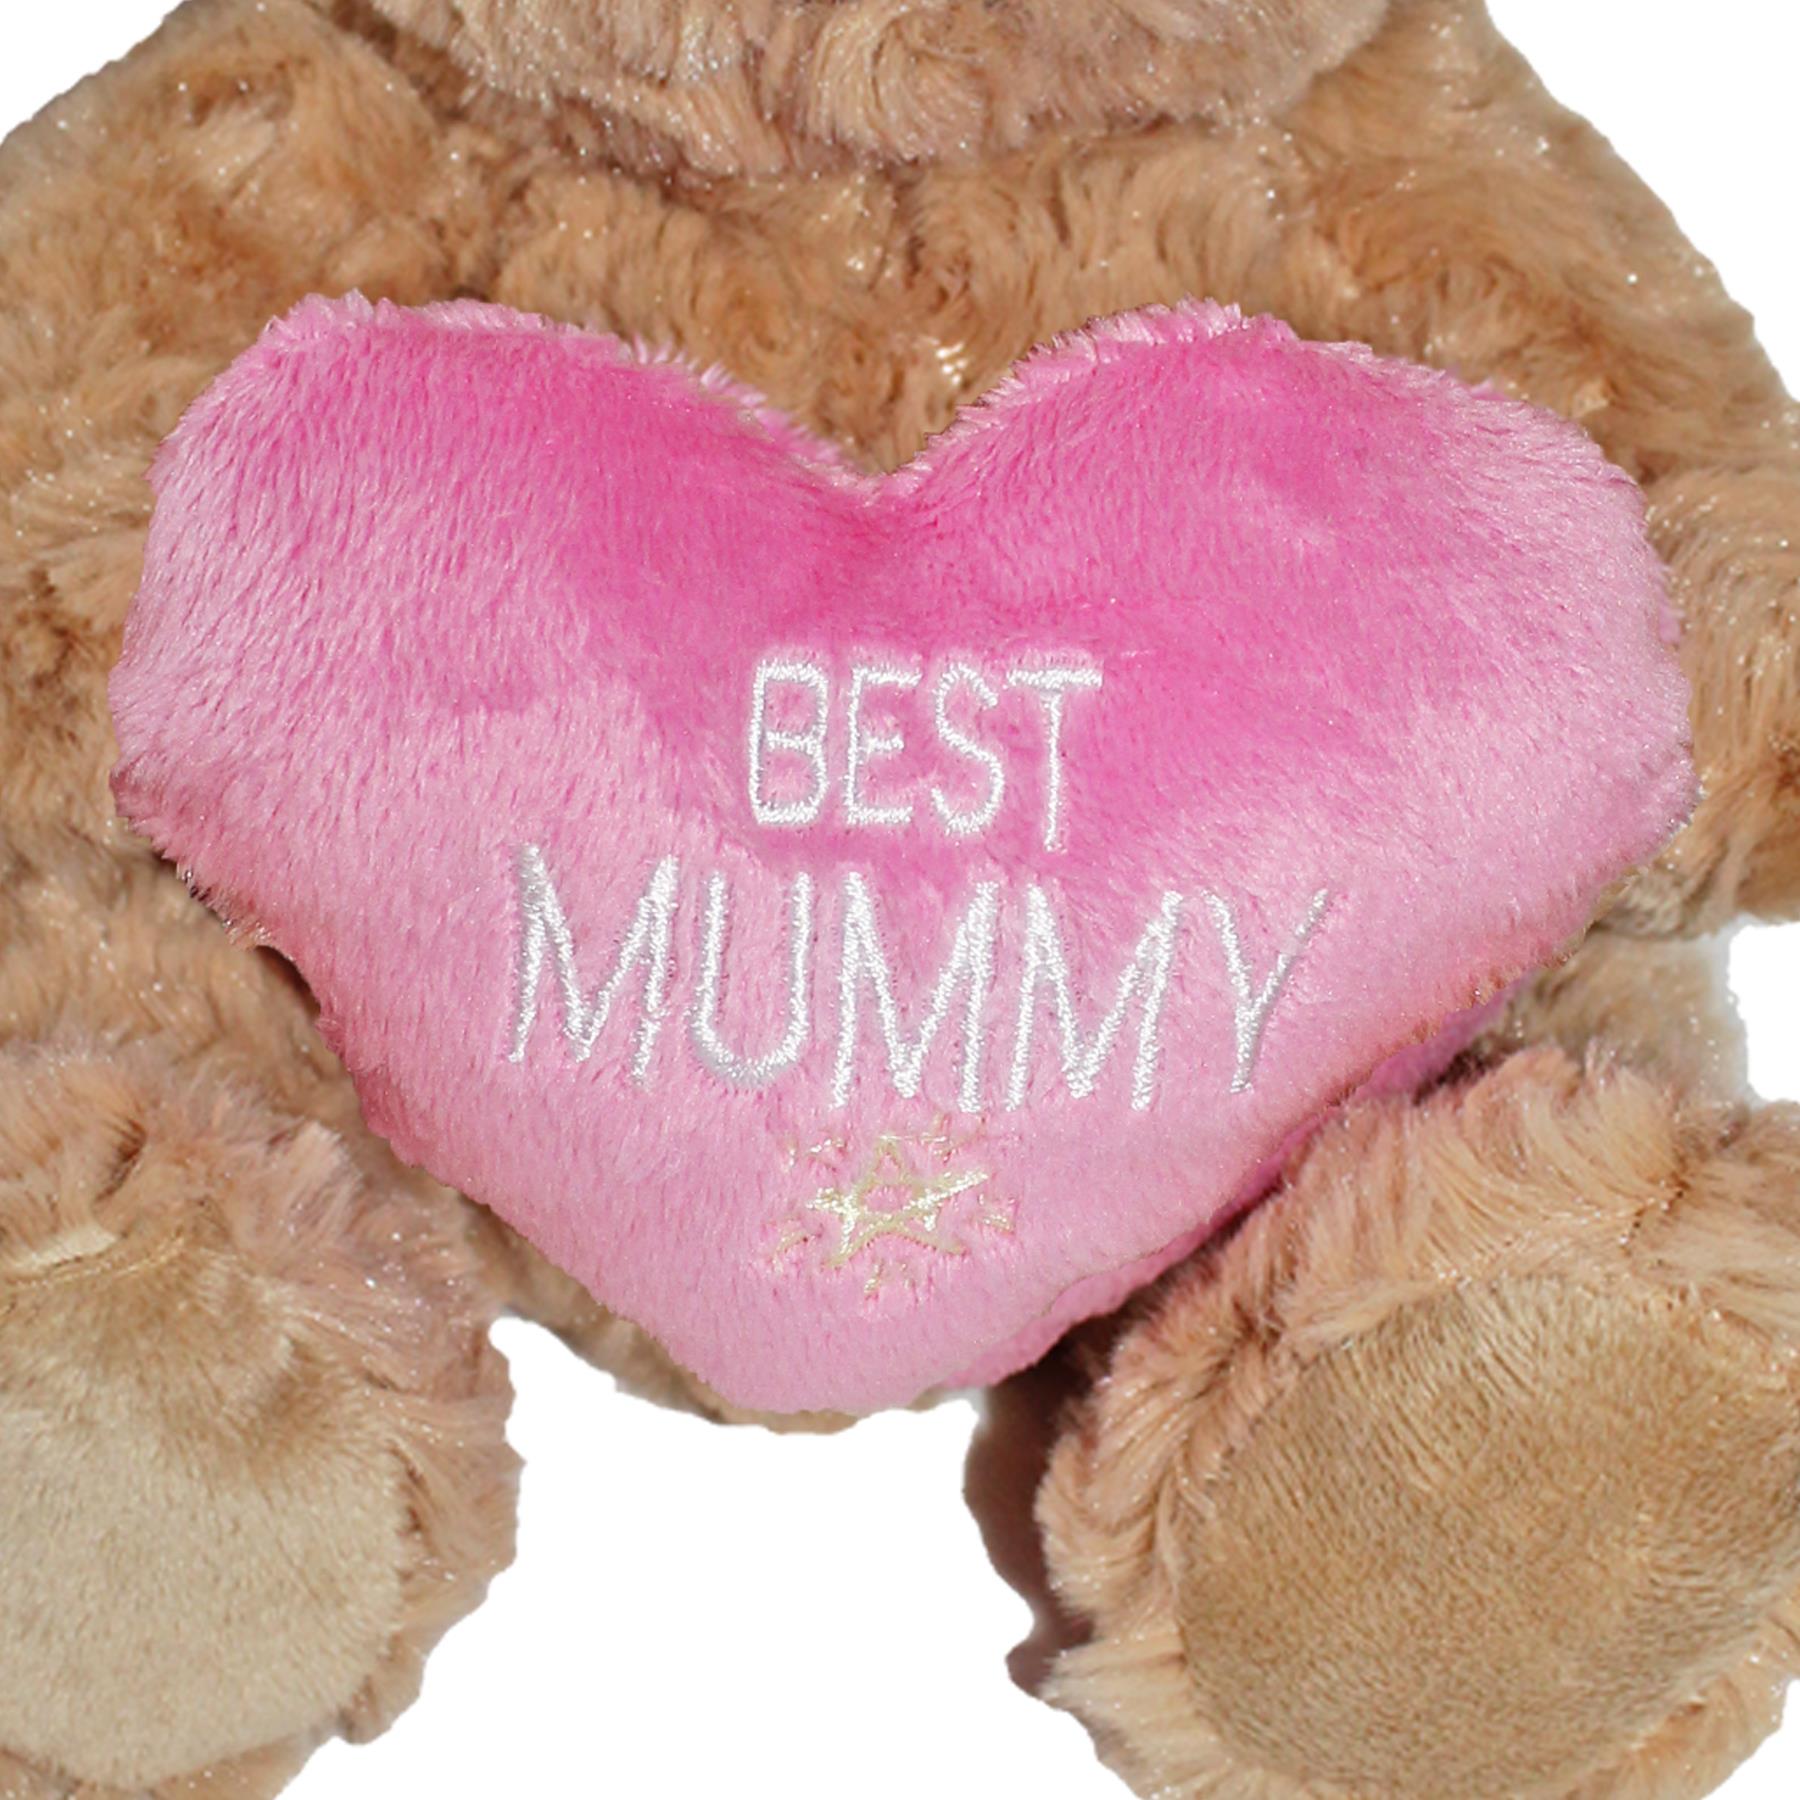 Teddy Bear with Pink Heart Mummy Cushion Mother's Day Gift